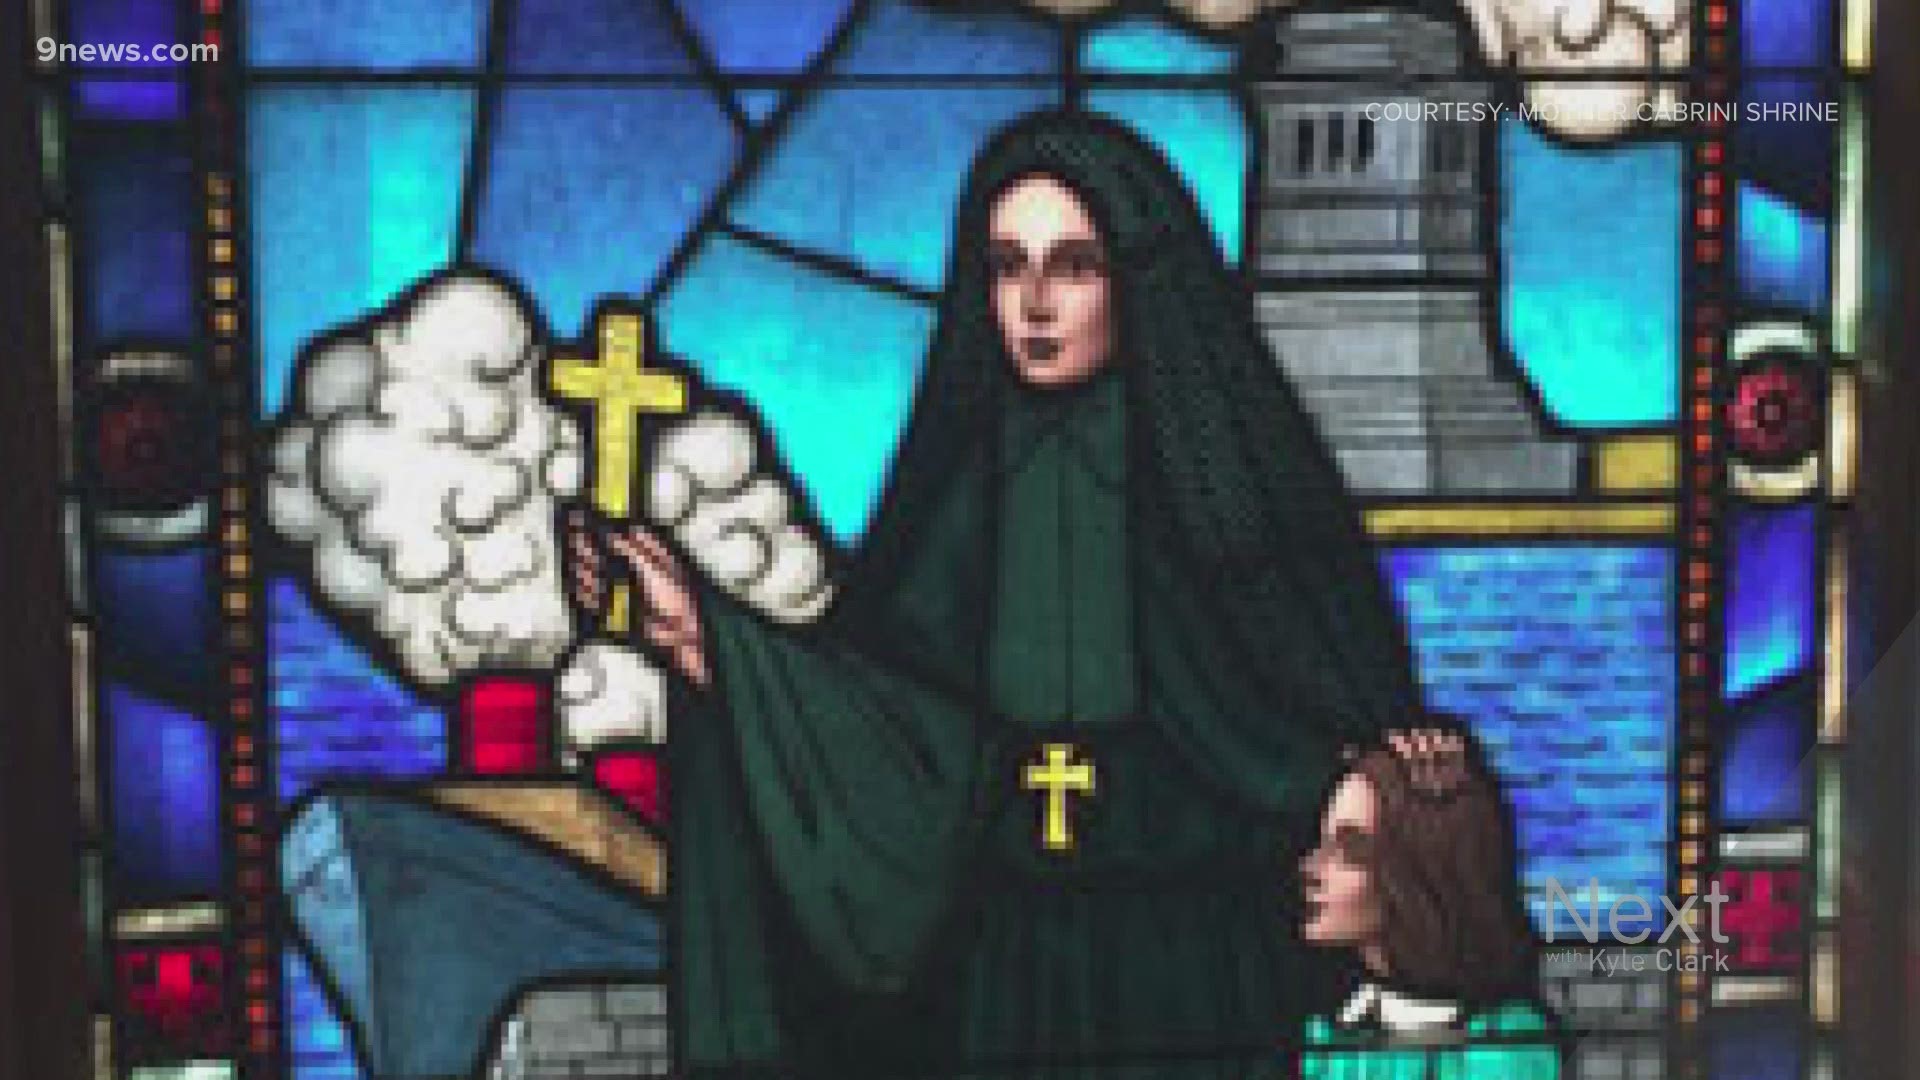 The legislature voted last year to replace Columbus Day with a day honoring St. Frances Xavier Cabrini, who set up hospitals, schools and orphanages (one in Golden).